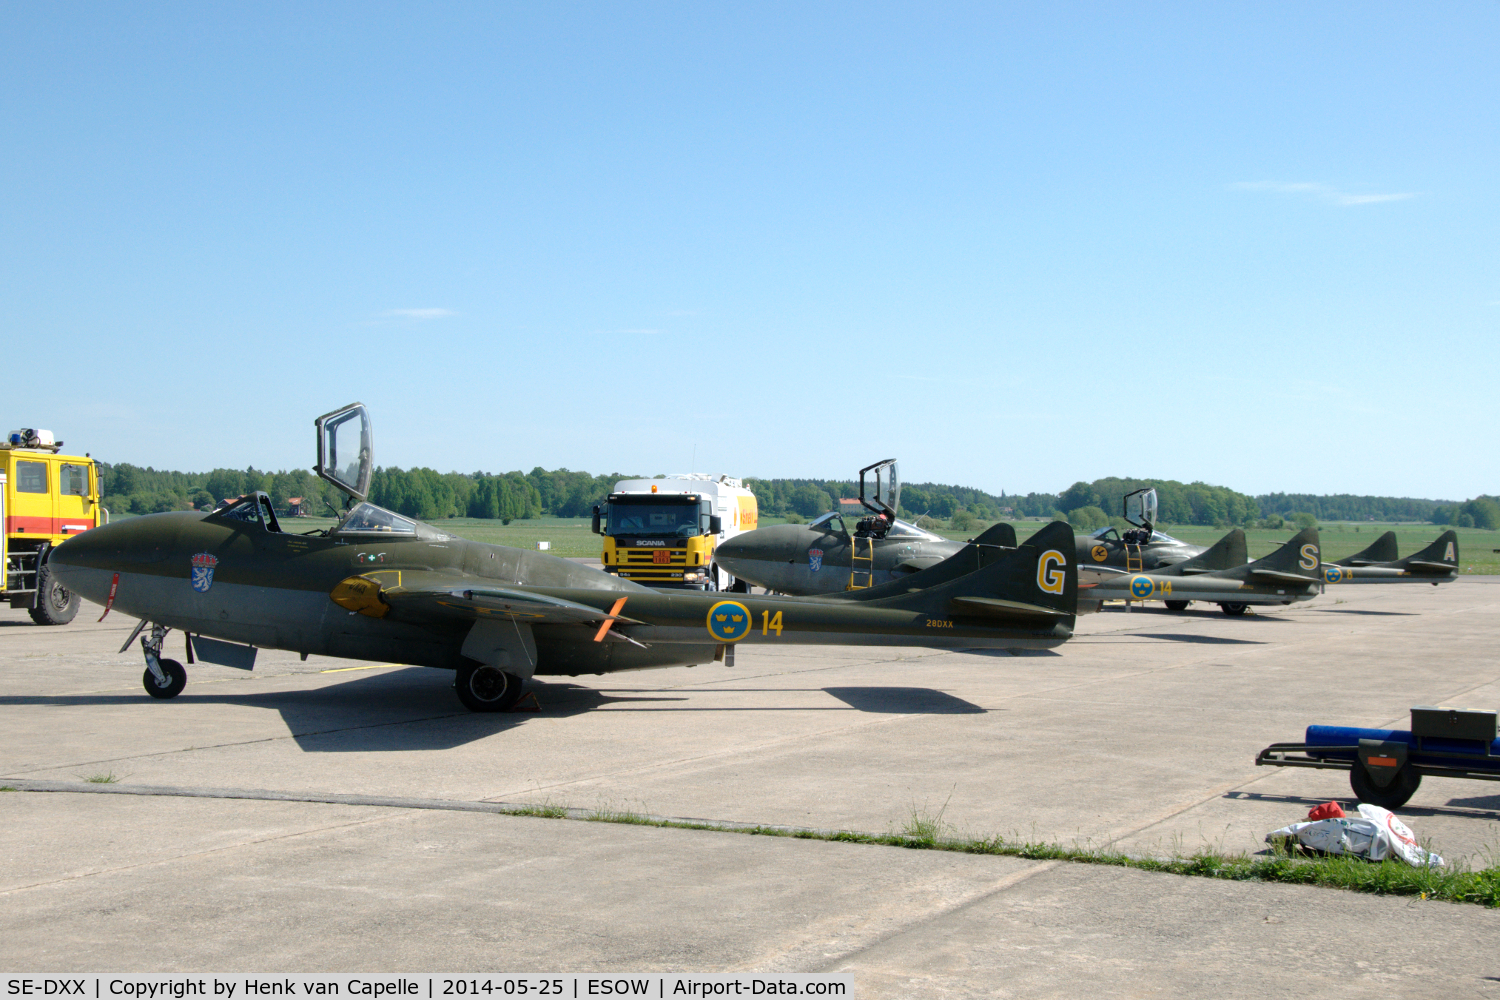 SE-DXX, 1953 De Havilland DH-115 Vampire T.55 C/N DHP 40303, What a sight: three Swedish Vampires at Västerås Hässlö airport for the 2014 Roll-out Air Show, with SE-DXX in front.